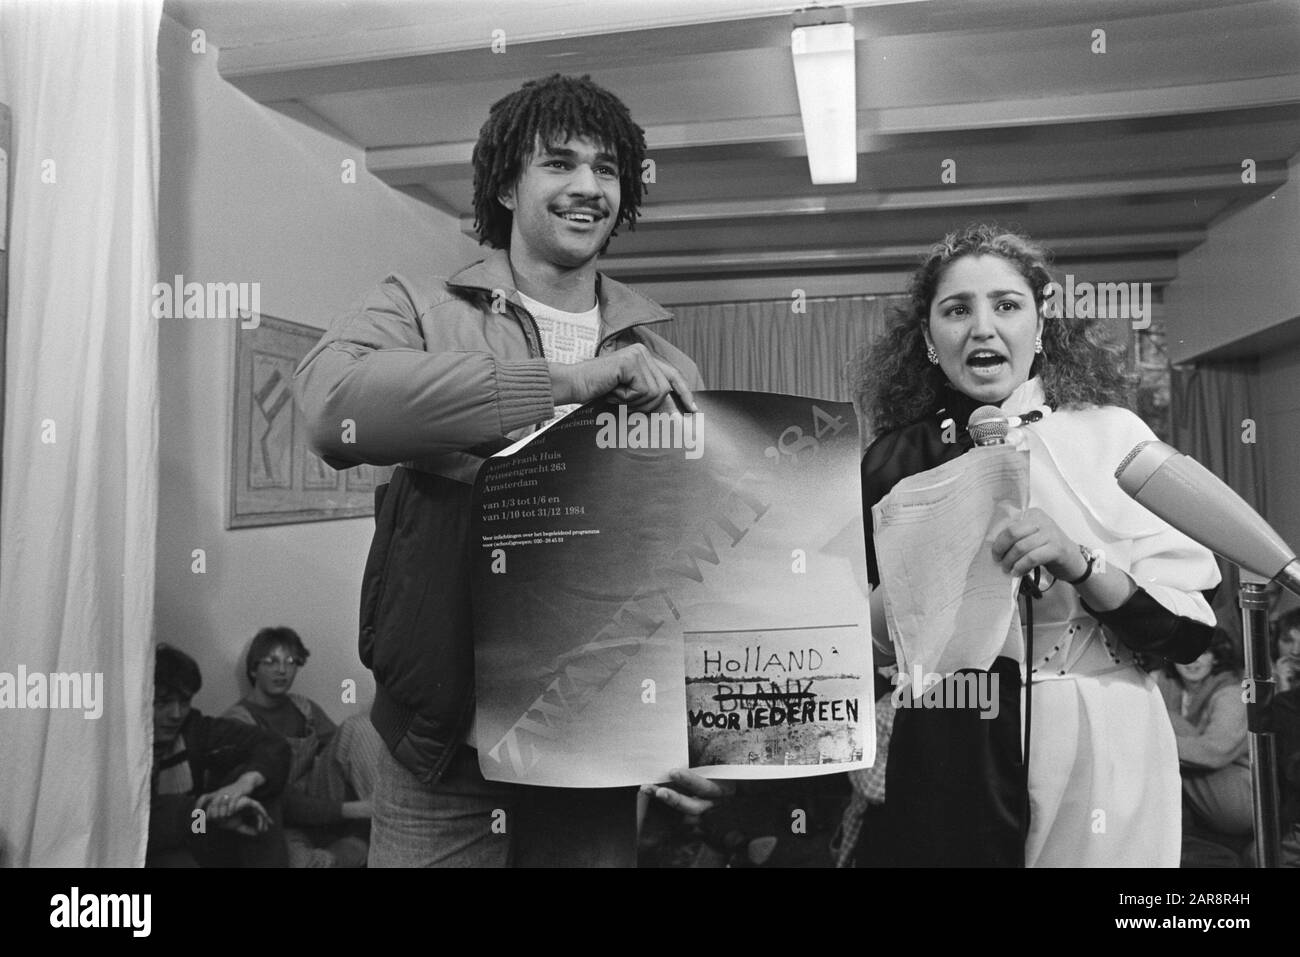 Tent. Zwart Wit on rascism opened by Ruud Gullit (Ajax) (Amsterdam); with poster and Gulnaz Aslan (presenter Radio Thueland) Date: 29 February 1984 Location: Amsterdam, Noord-Holland Keywords: RACISM, posters, exhibitions Personal name: Gullit, Ruud, Radio Thuisland Stock Photo